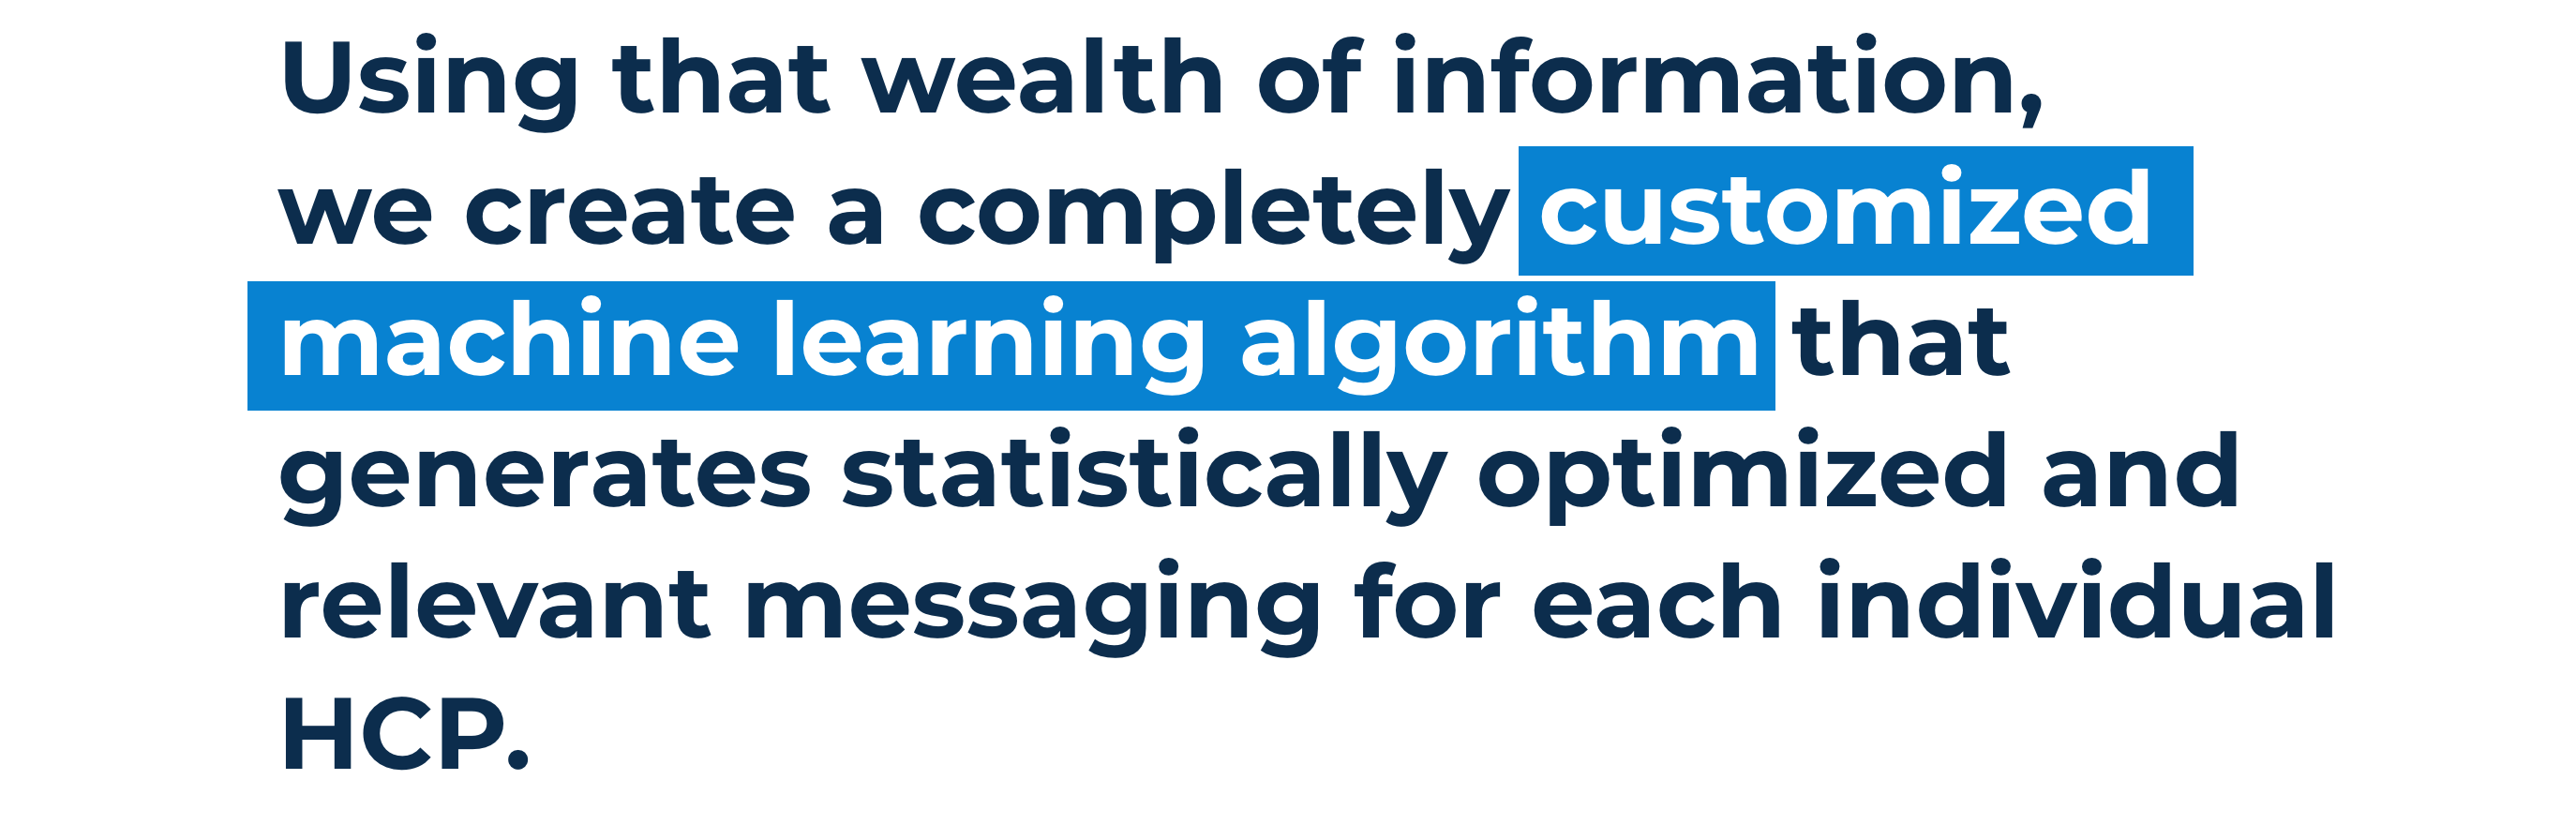 Using that wealth of information, we create a completely customized machine learning algorithm that generates statistically optimized and relevant messaging for each individual HCP.